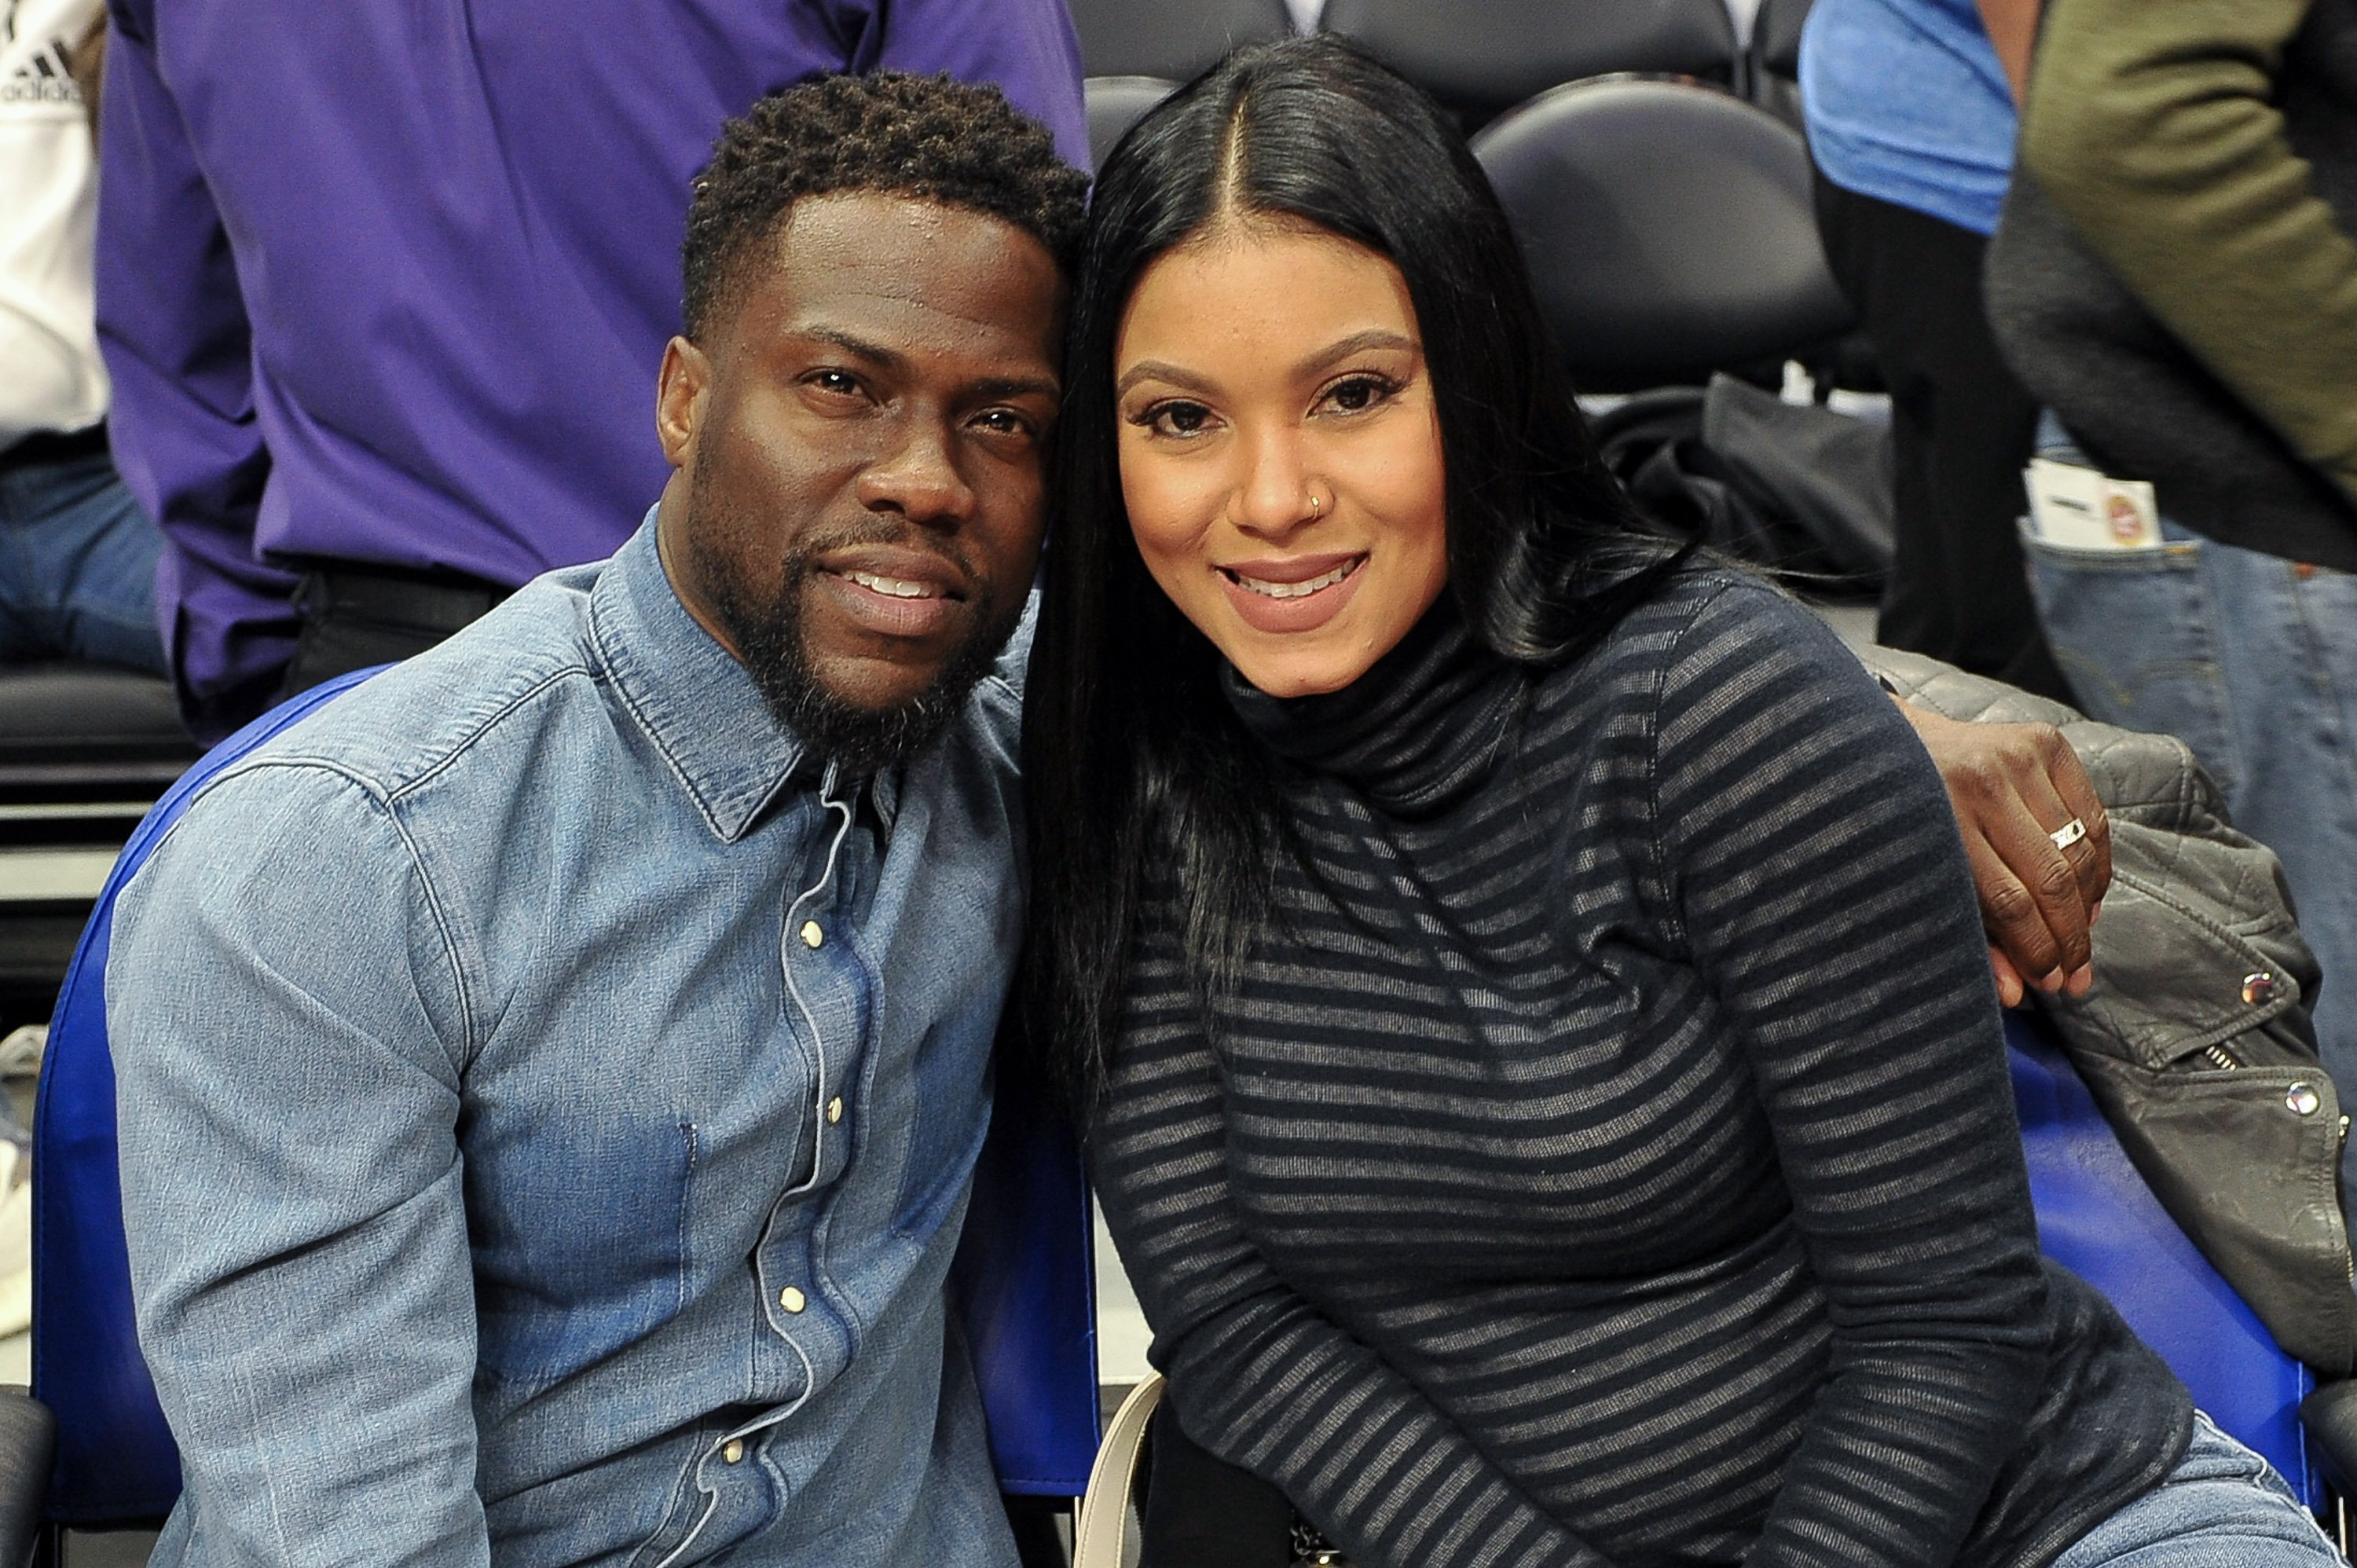 Kevin & Eniko Hart at a basketball game on Jan. 22, 2018 in California | Photo: Getty Images